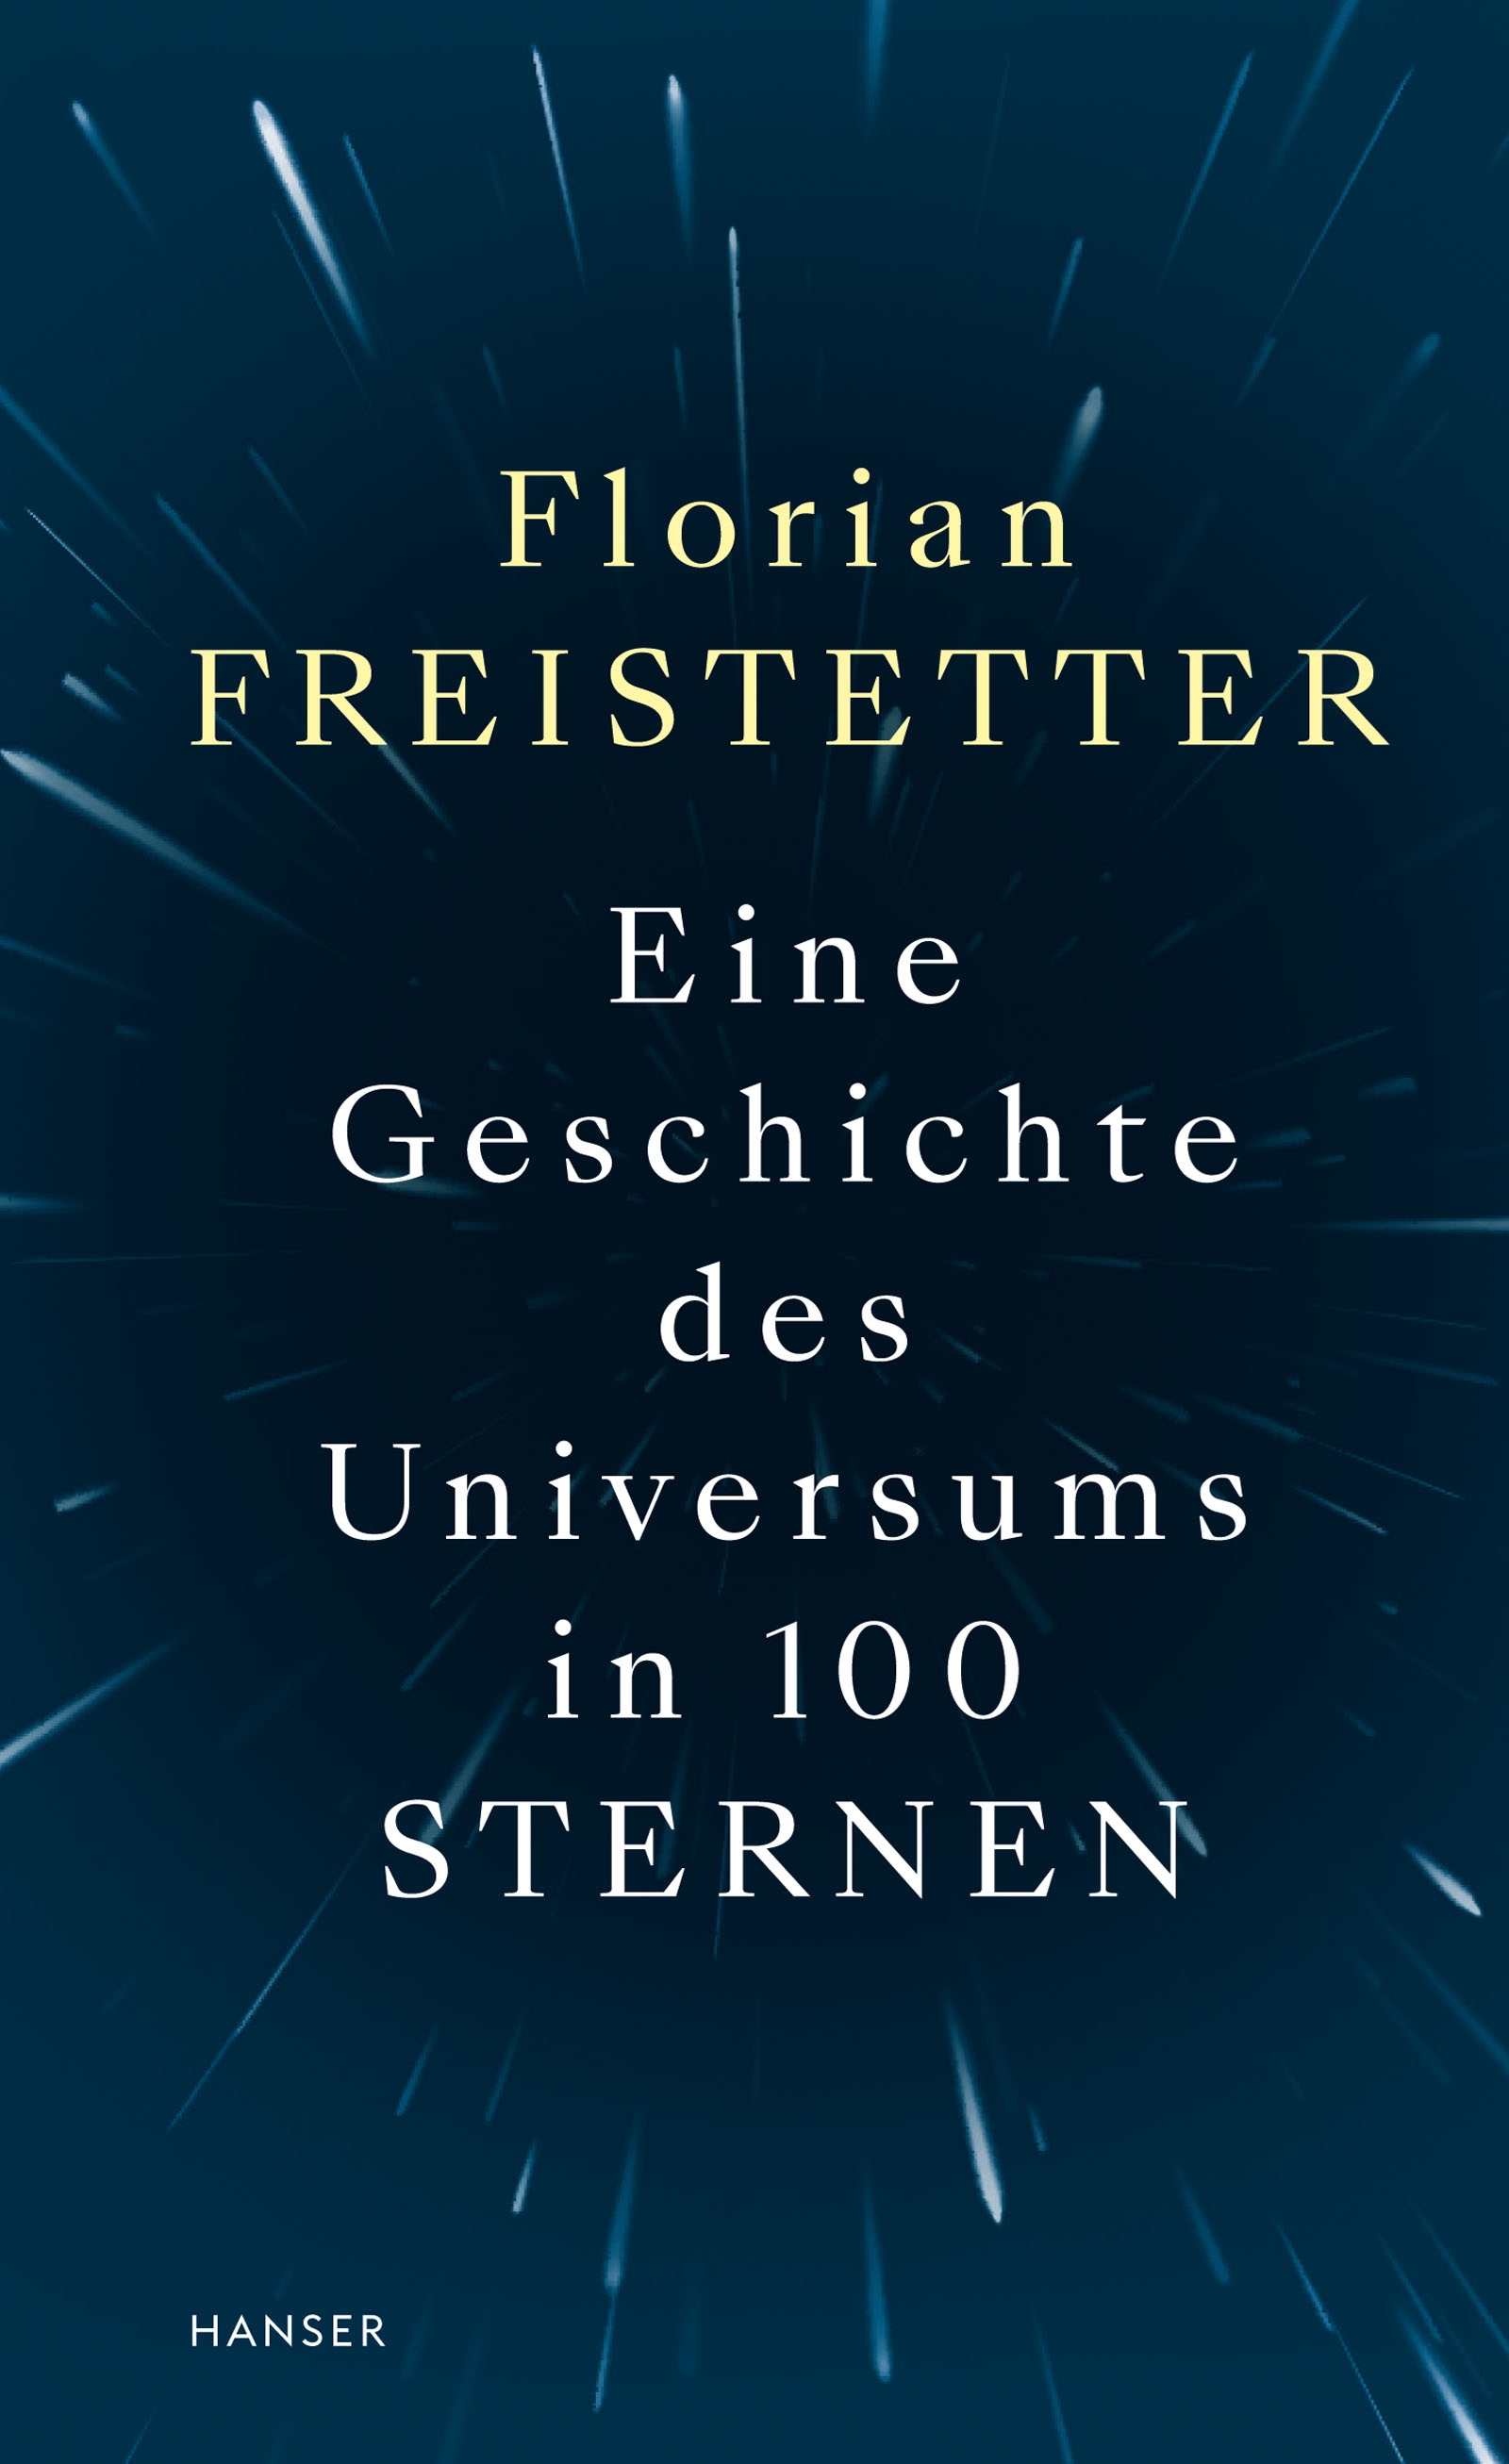 A History of the Universe in 100 Stars